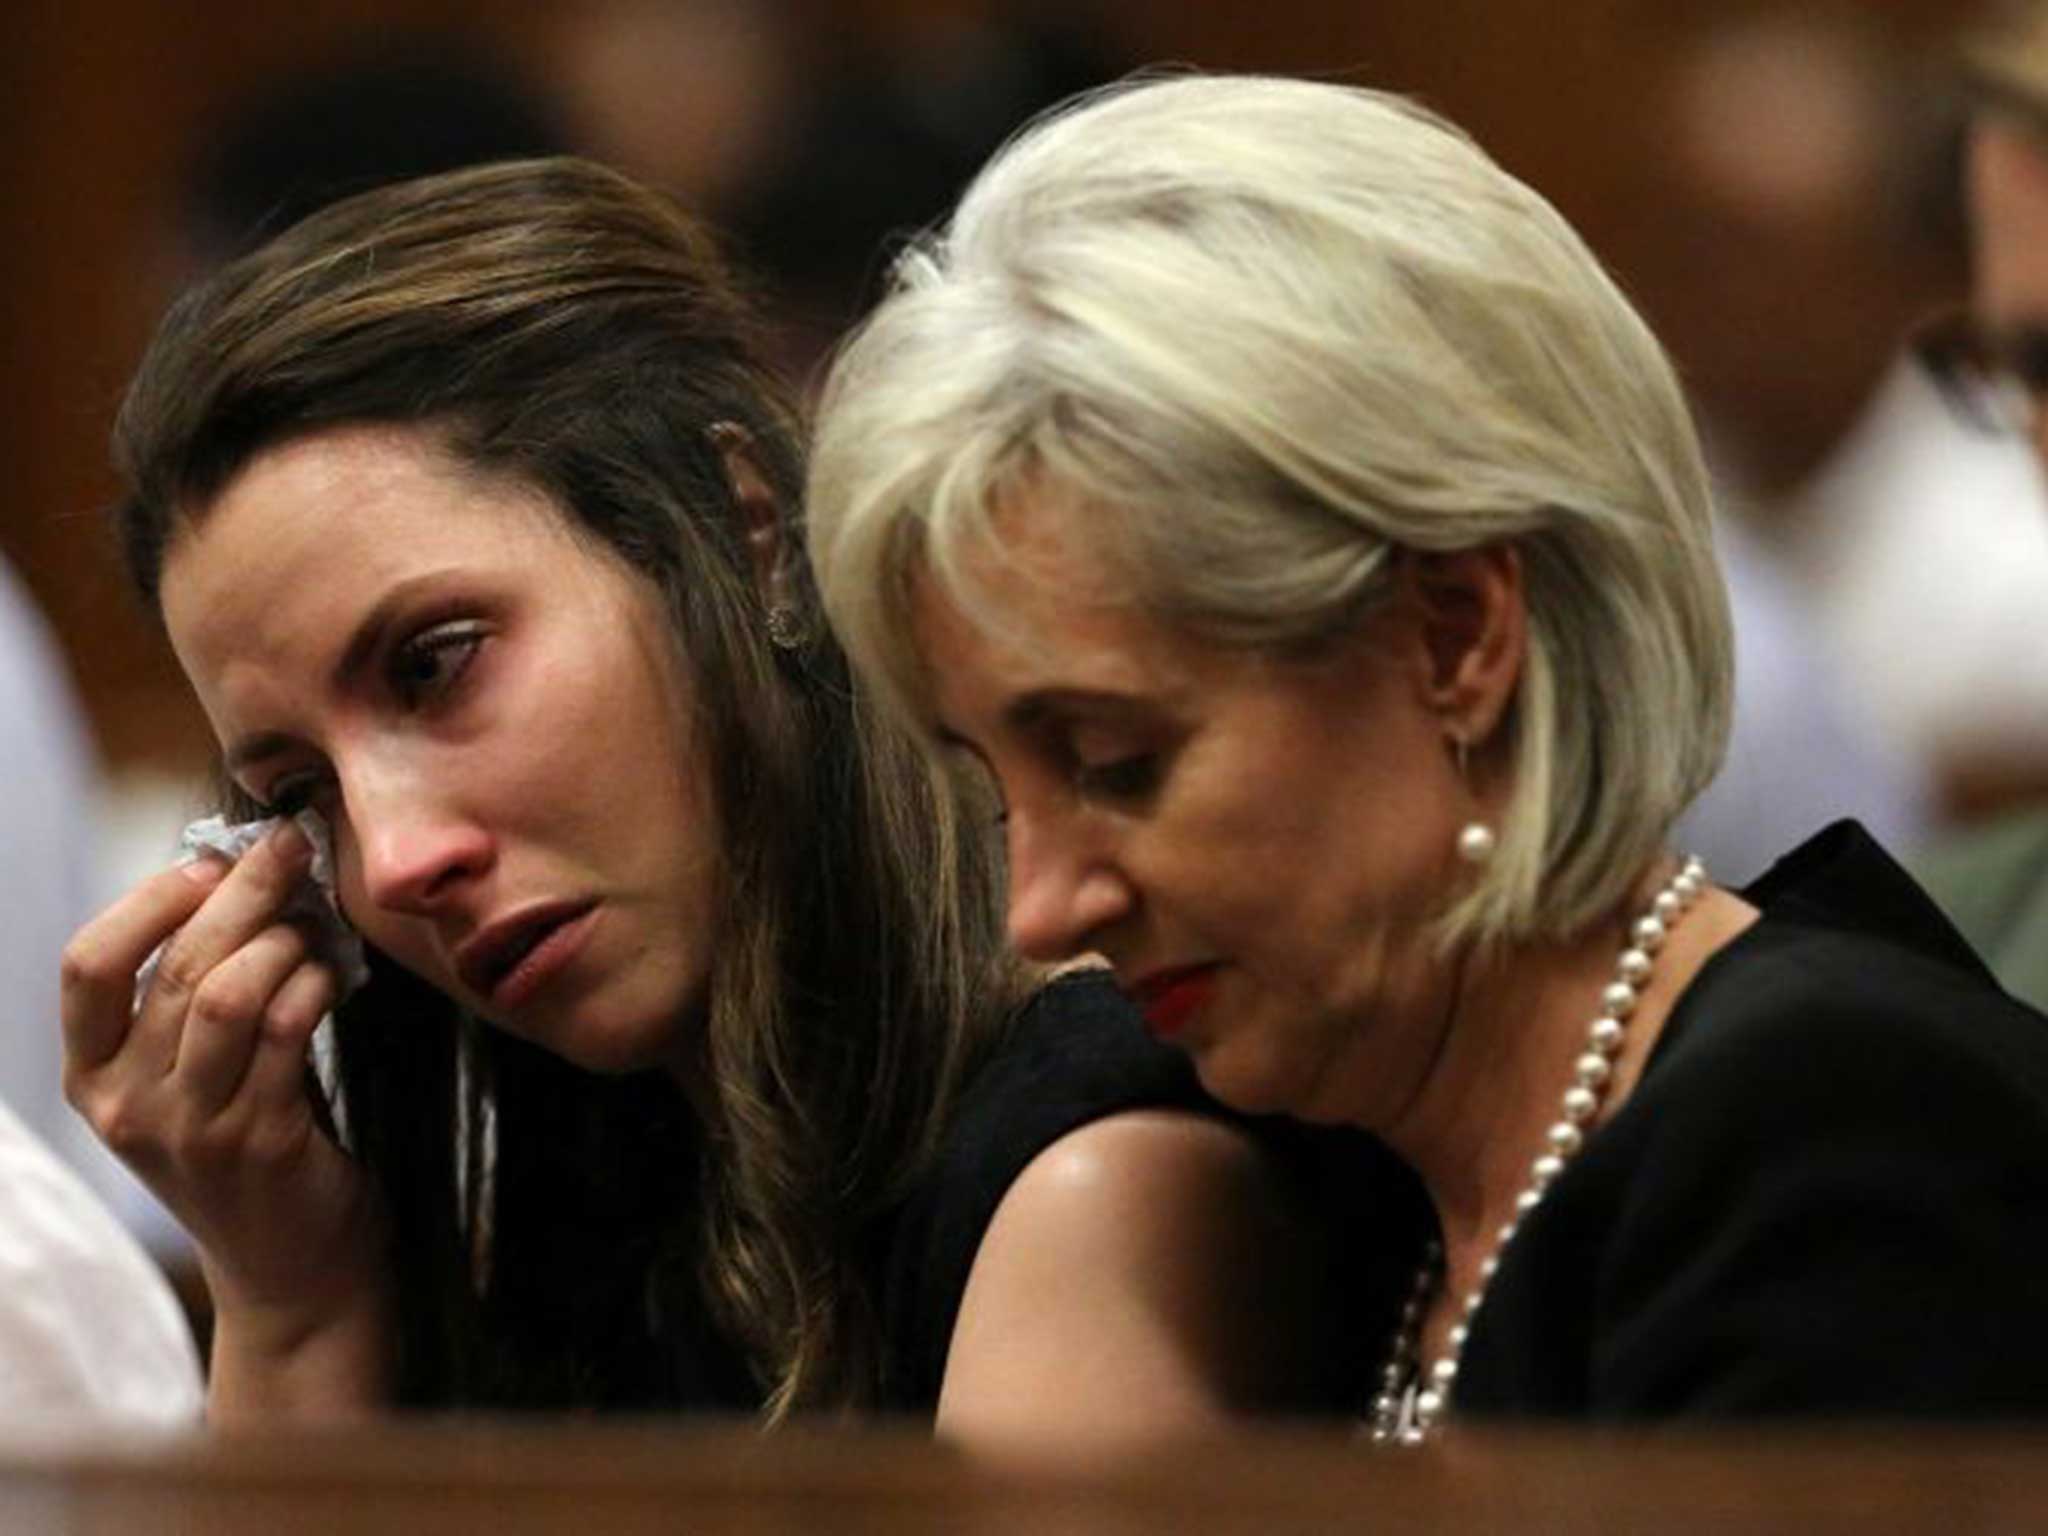 Aimee (L), sits next to her aunt Lois in court earlier today